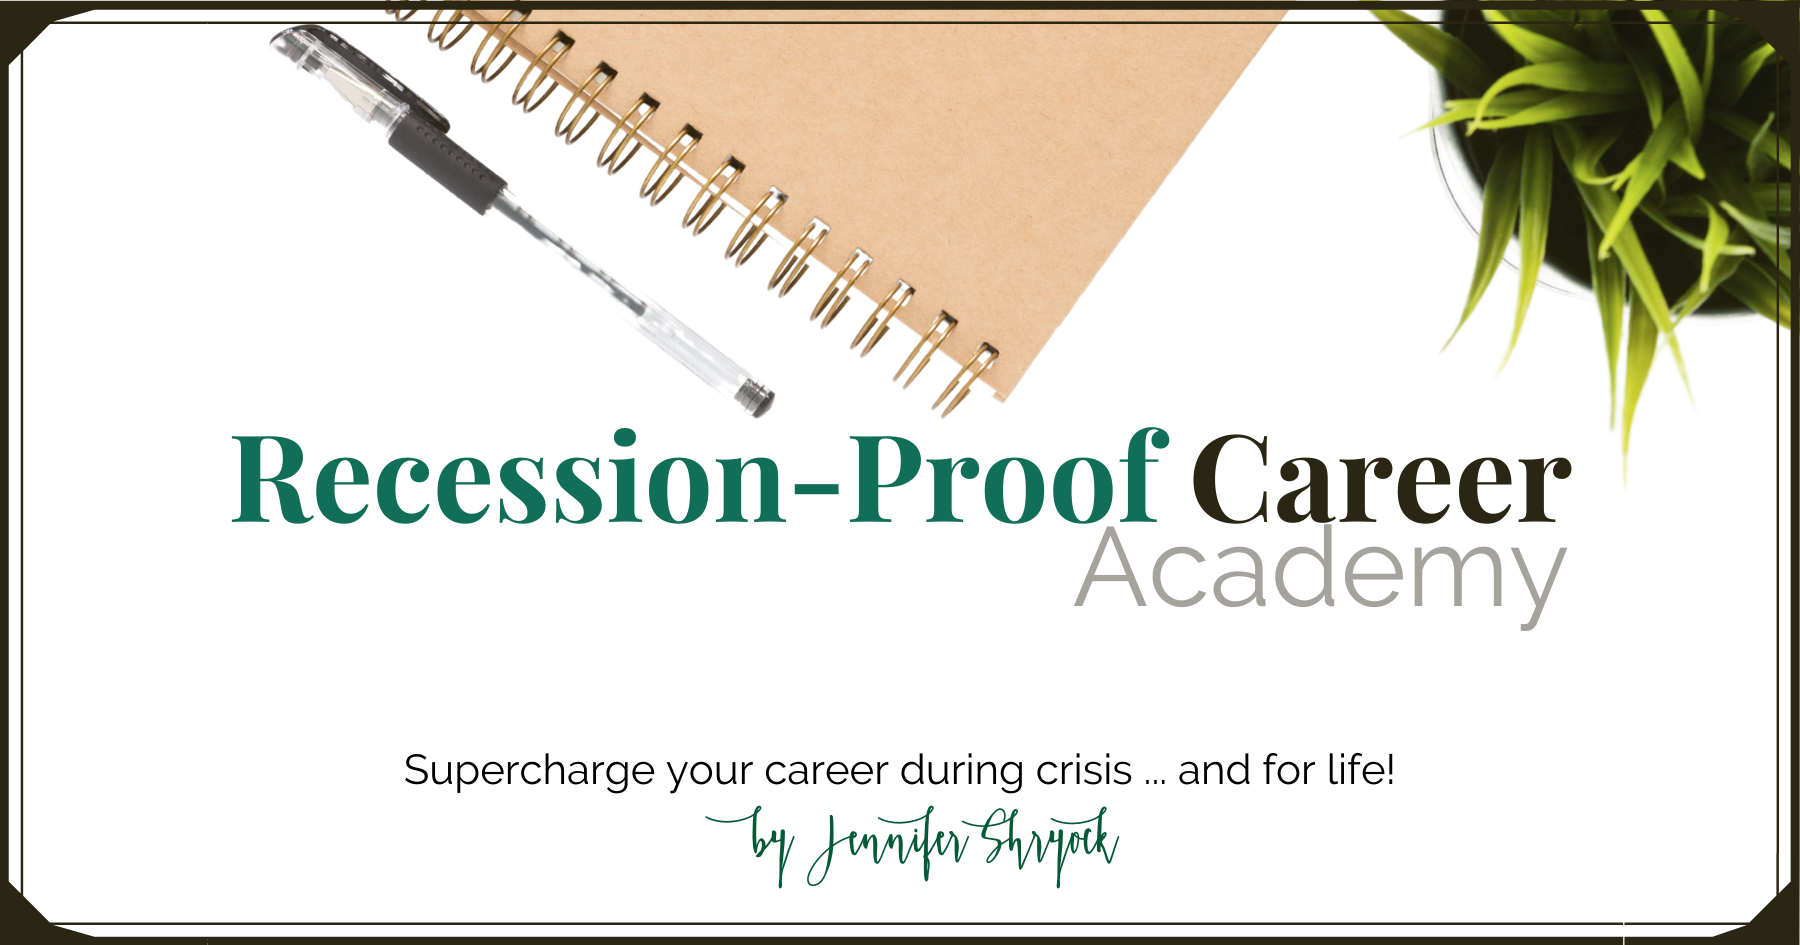 Recession-proof your career